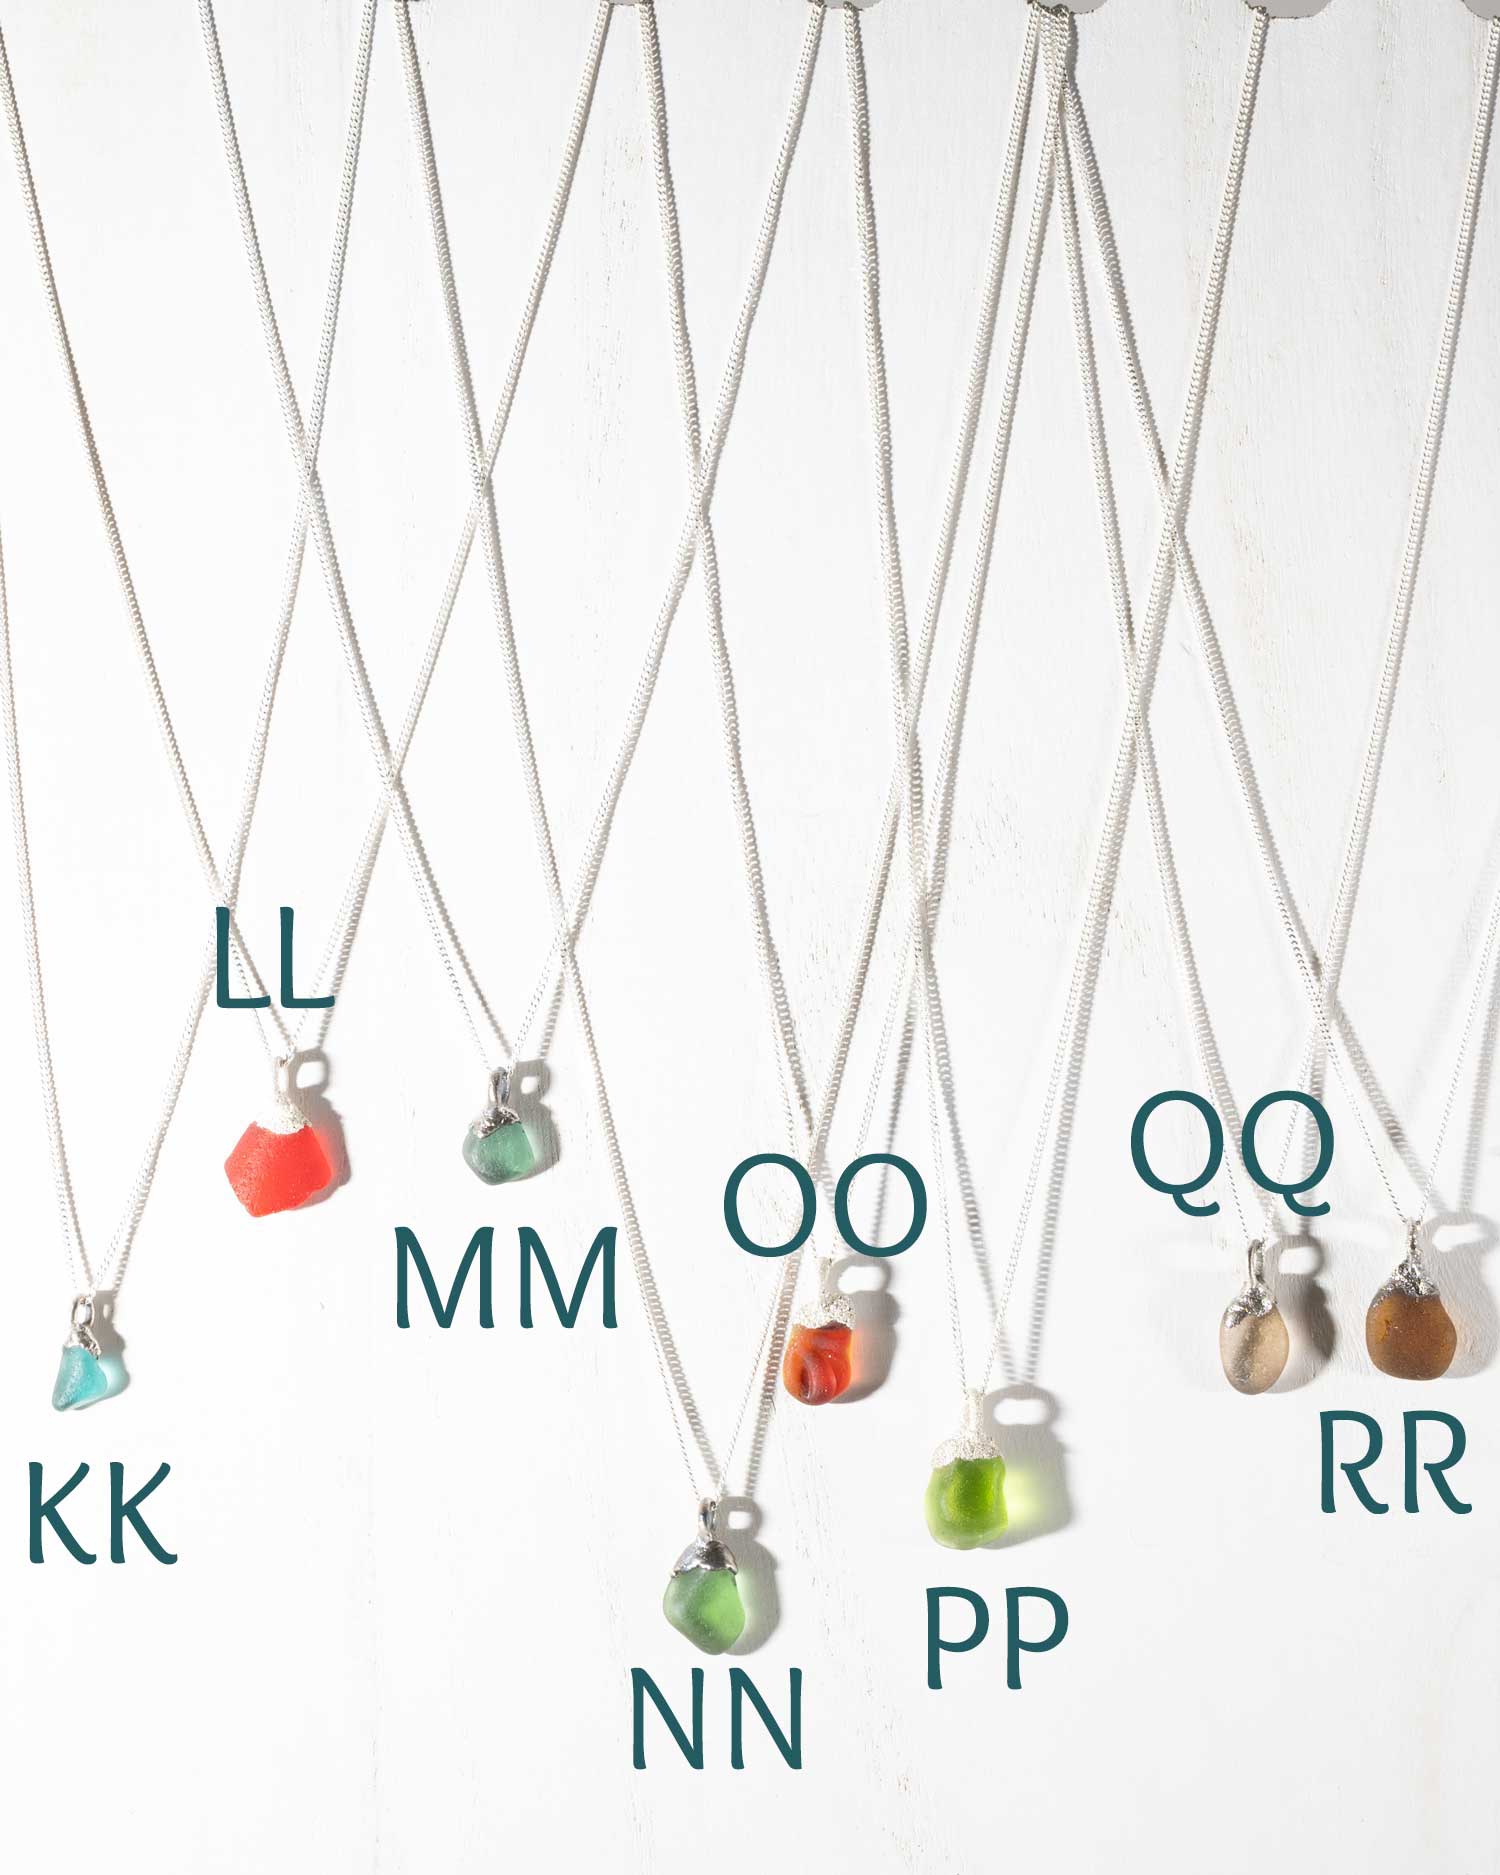 sea glass pendant necklaces available for sale